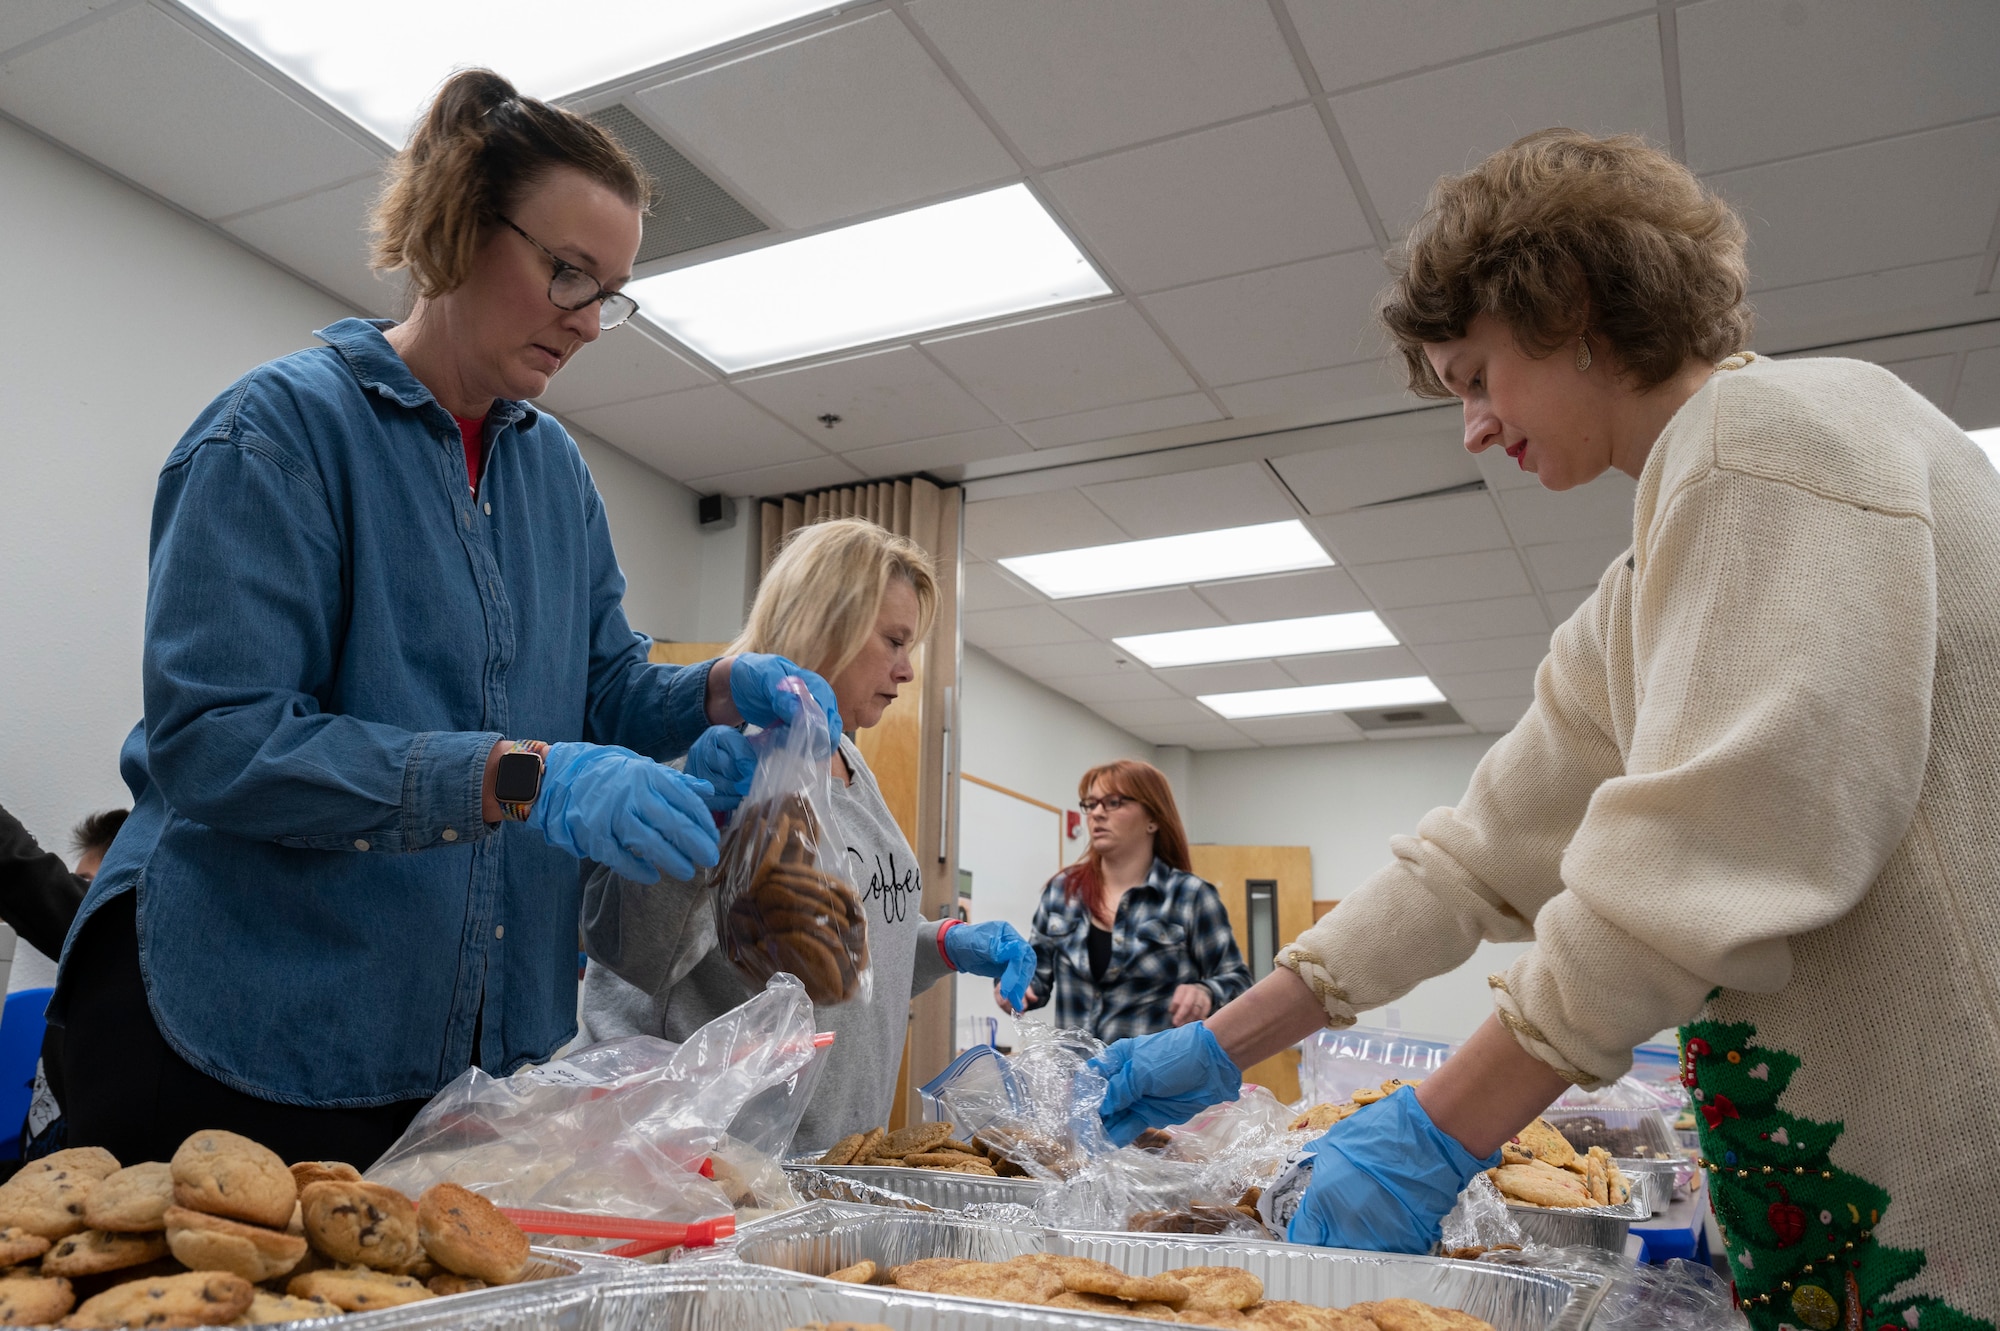 Volunteers for Operation Cookie Drop sort and box cookies at Dyess Air Force Base, Texas, Dec. 15, 2023. Hosted by the Dyess Spouses’ Club, the event collects home-made cookies to be delivered to 725 dorm Airmen. (U.S. Air Force photo by Airman 1st Class Alondra Cristobal Hernandez)